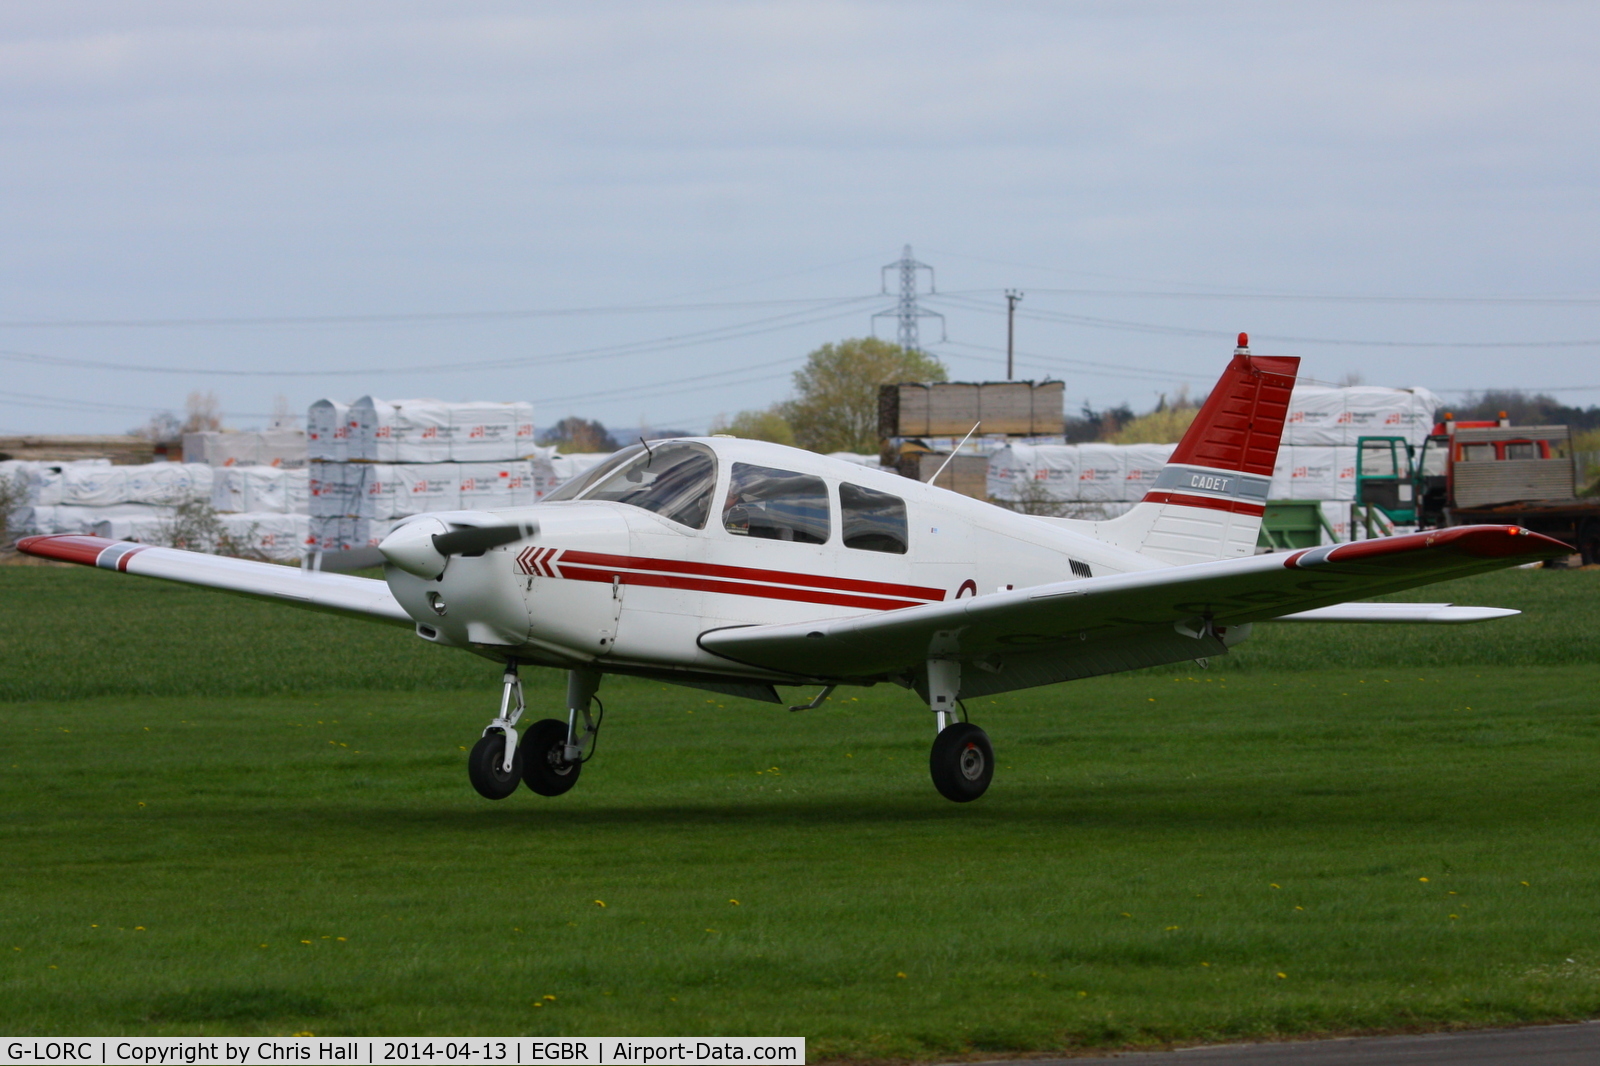 G-LORC, 1992 Piper PA-28-161 Cadet C/N 2841339, at Breighton's 'Early Bird' Fly-in 13/04/14